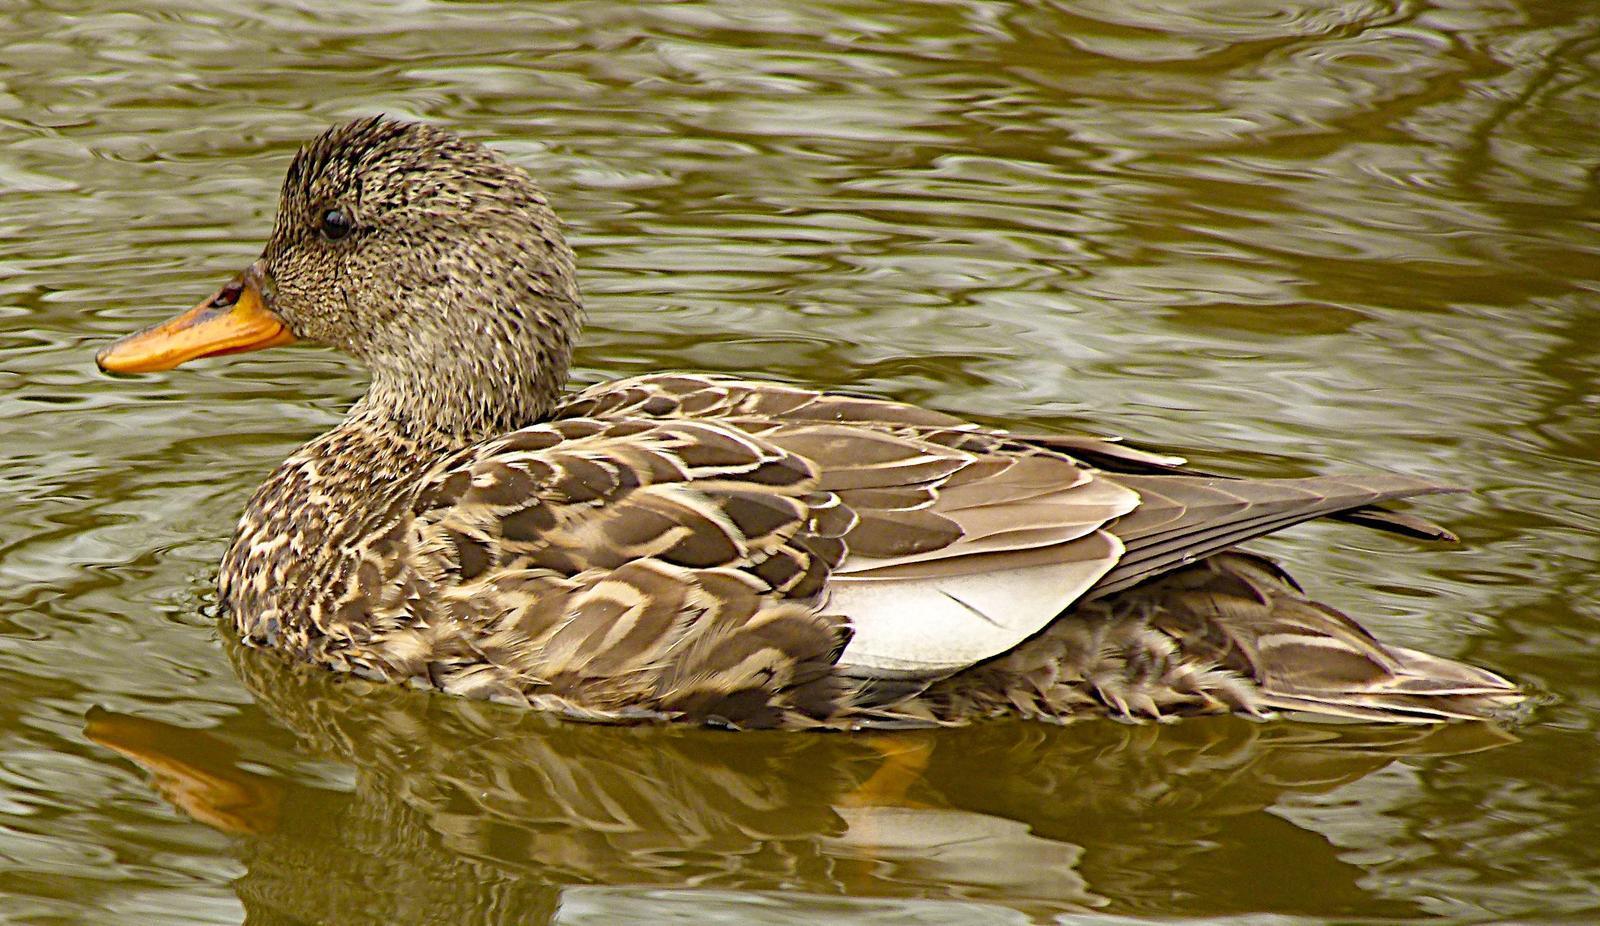 Gadwall Photo by Brian Avent